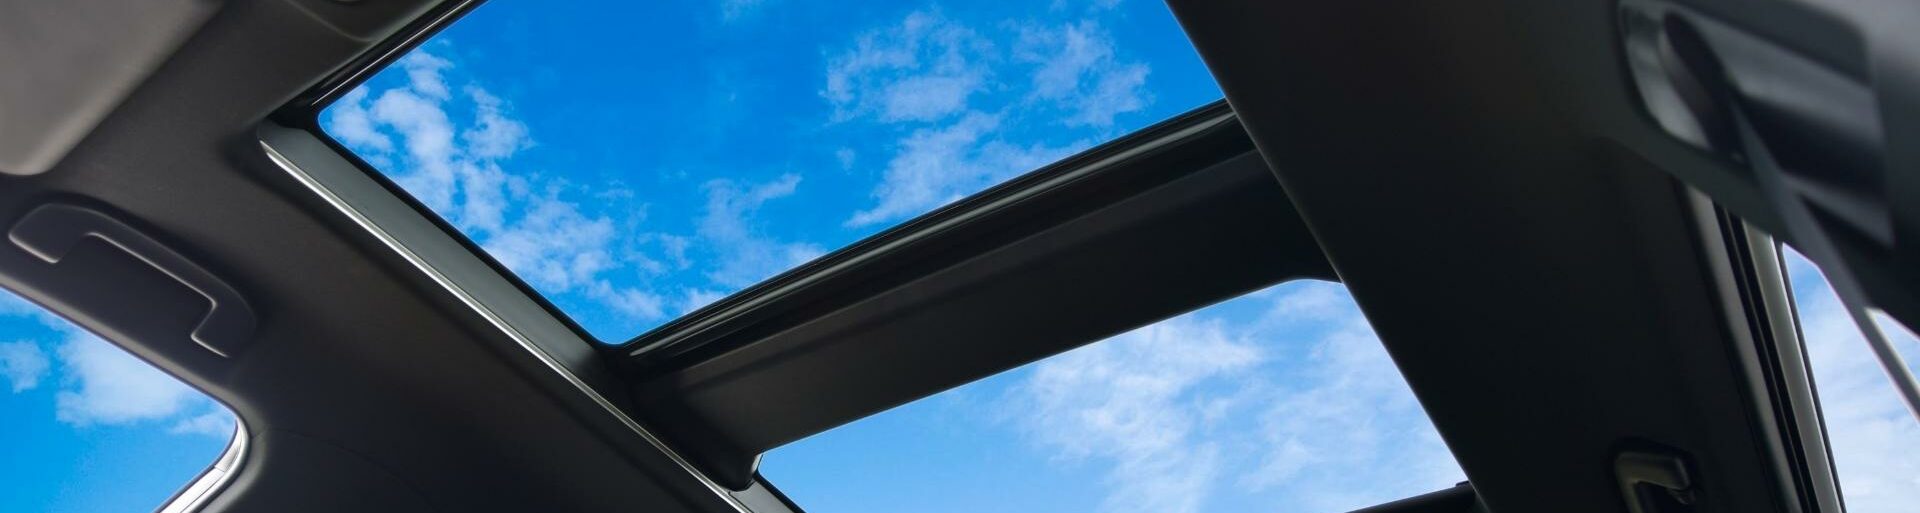 Double moonroof on the vehicle, view from cabin